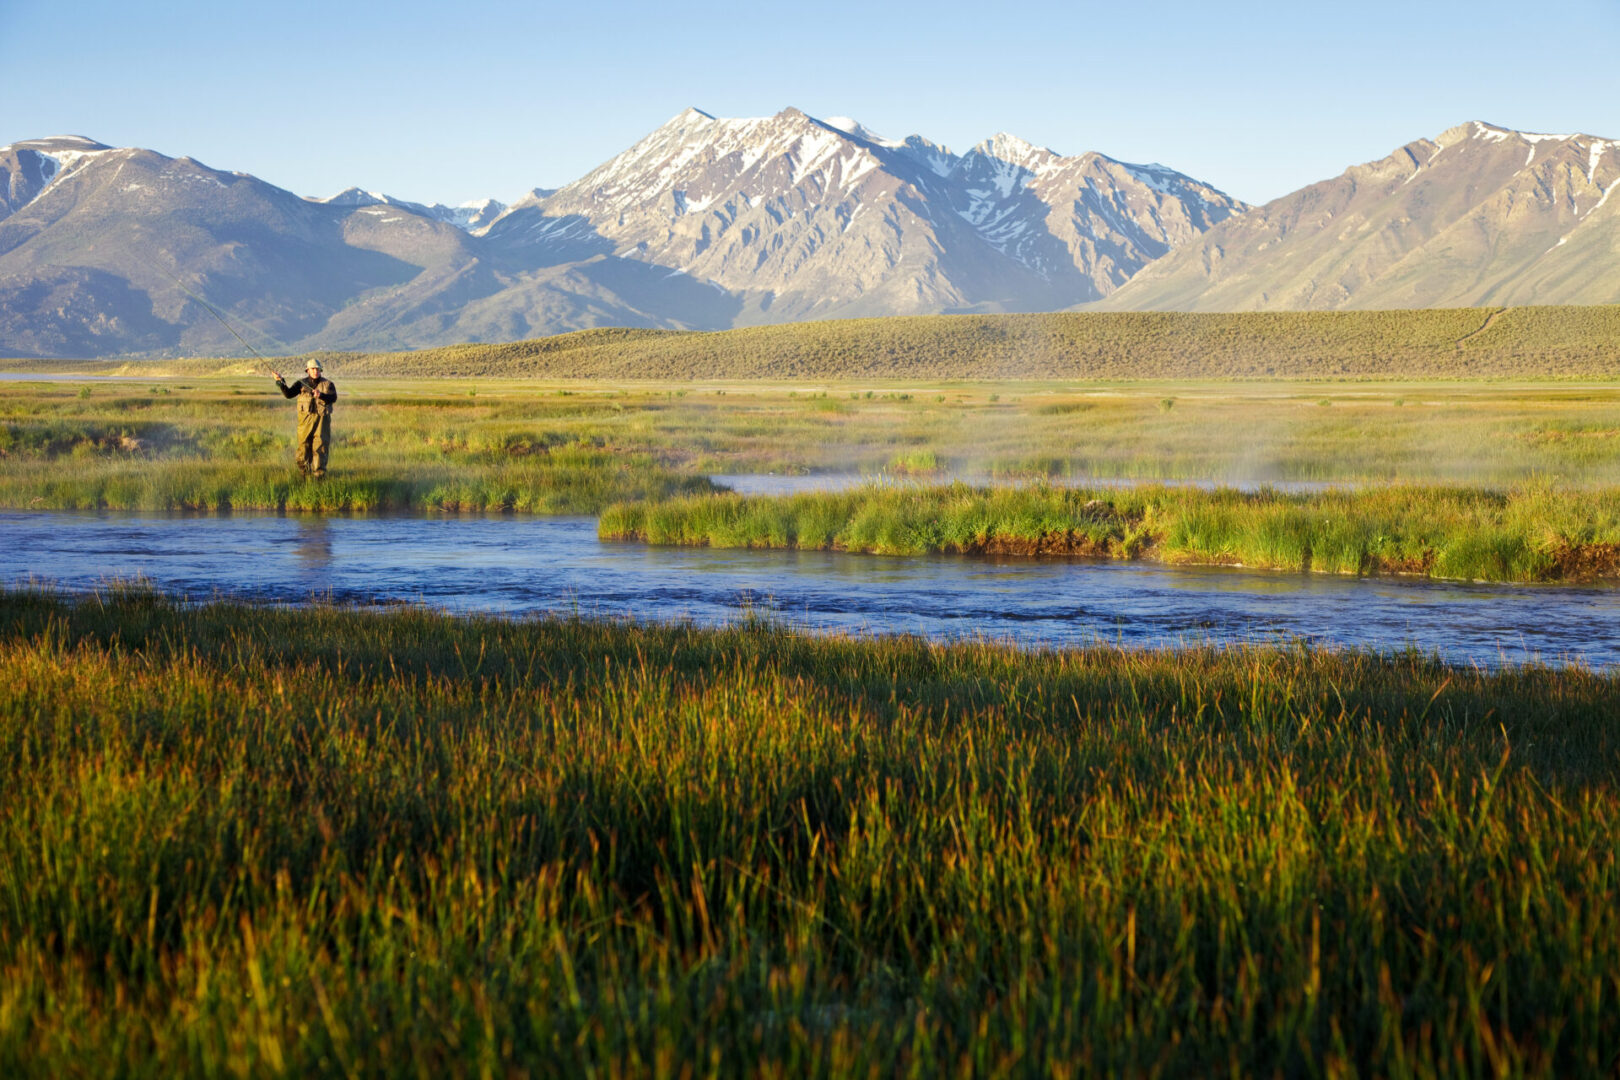 One man fly fishing on the Owens River at sunrise with the Sierra Nevada Mountains in the distance